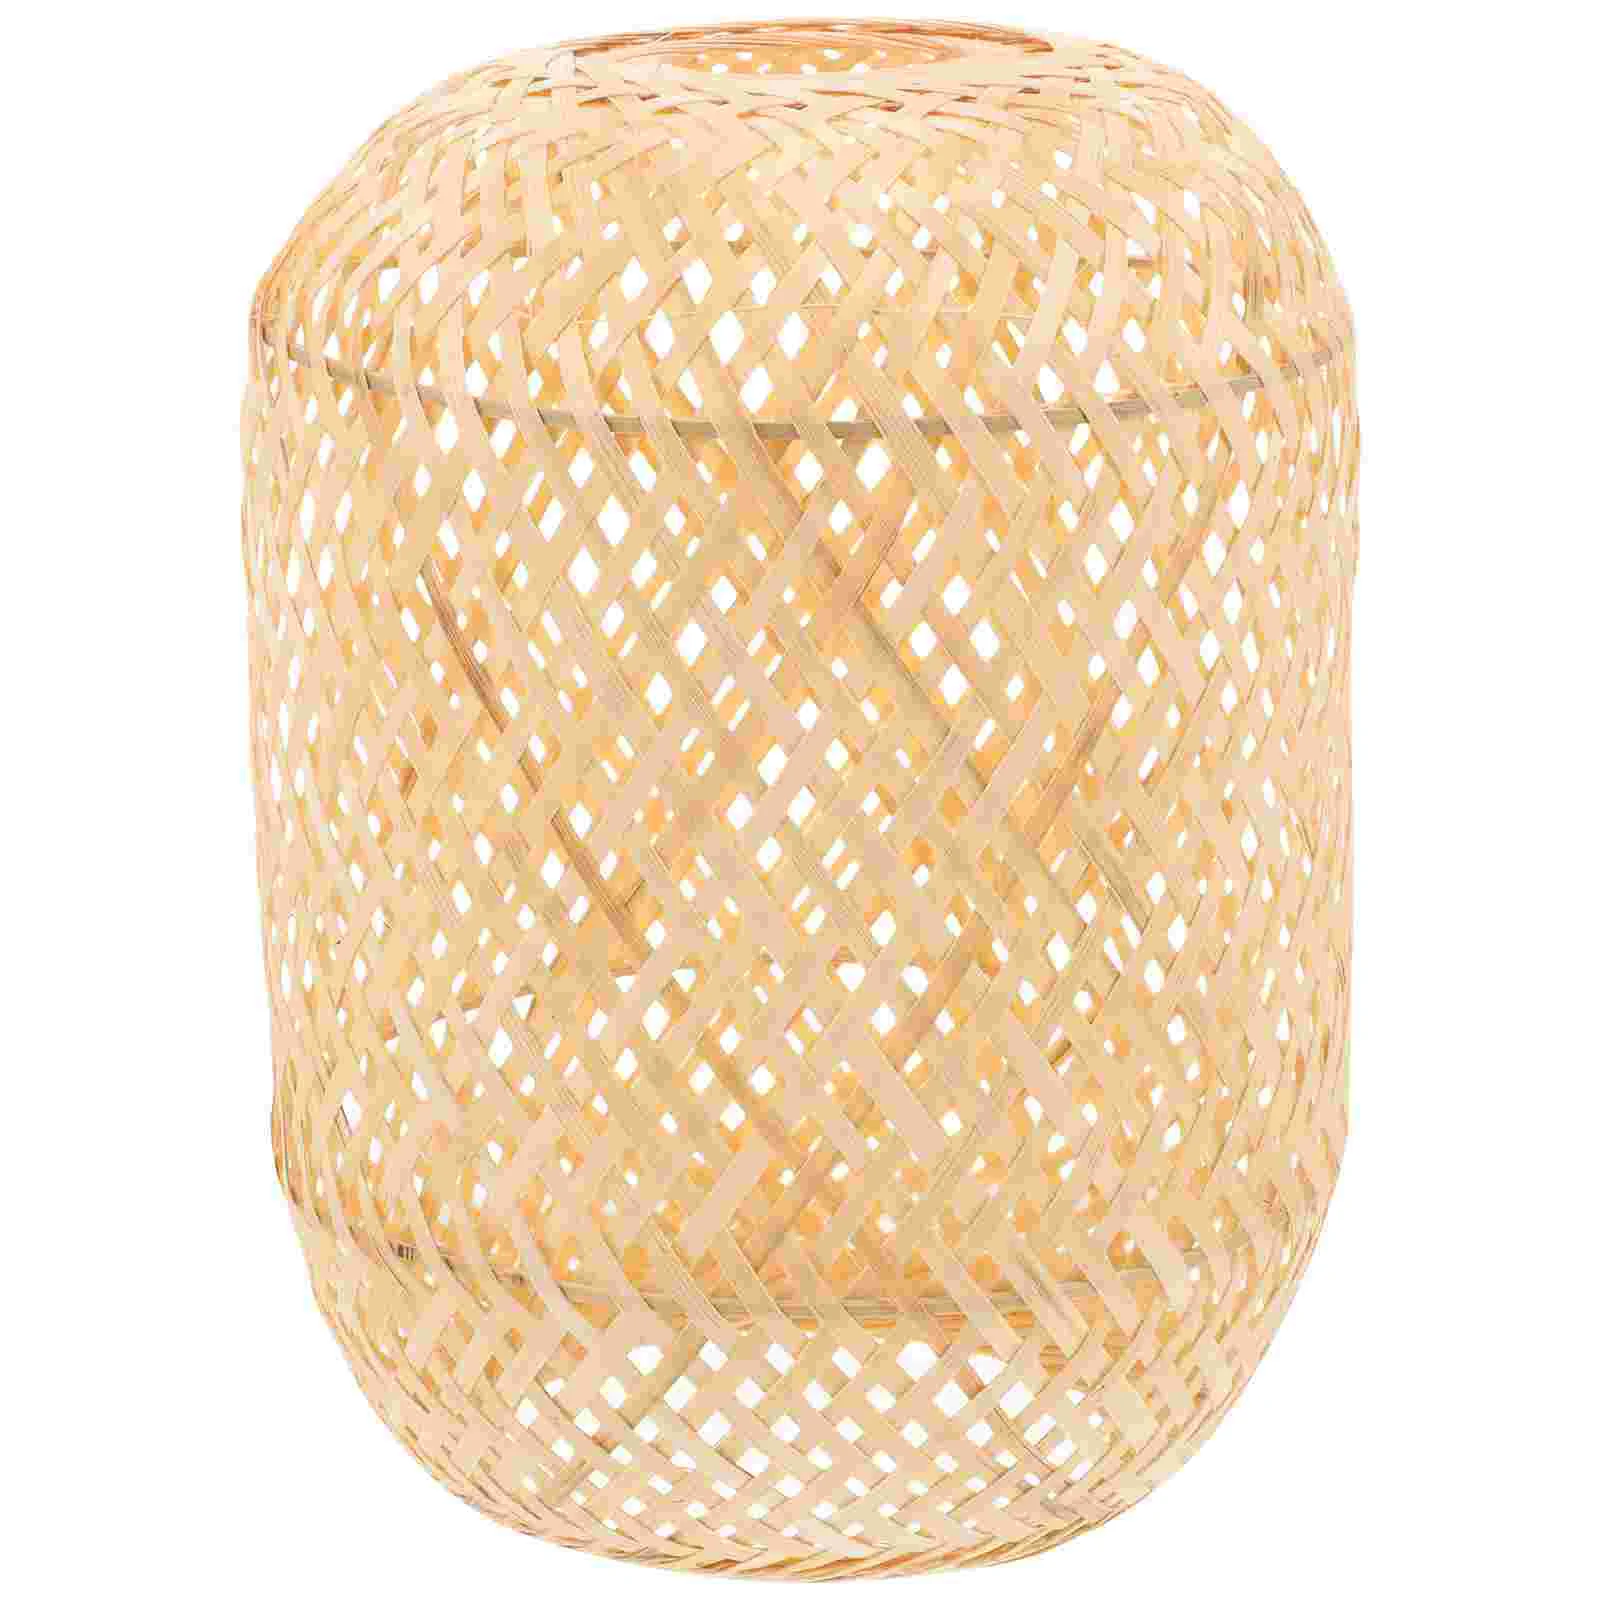 

Bamboo Lampshade Woven Rustic Style Lampshades for Table Decor Decorative Bedroom Lantern